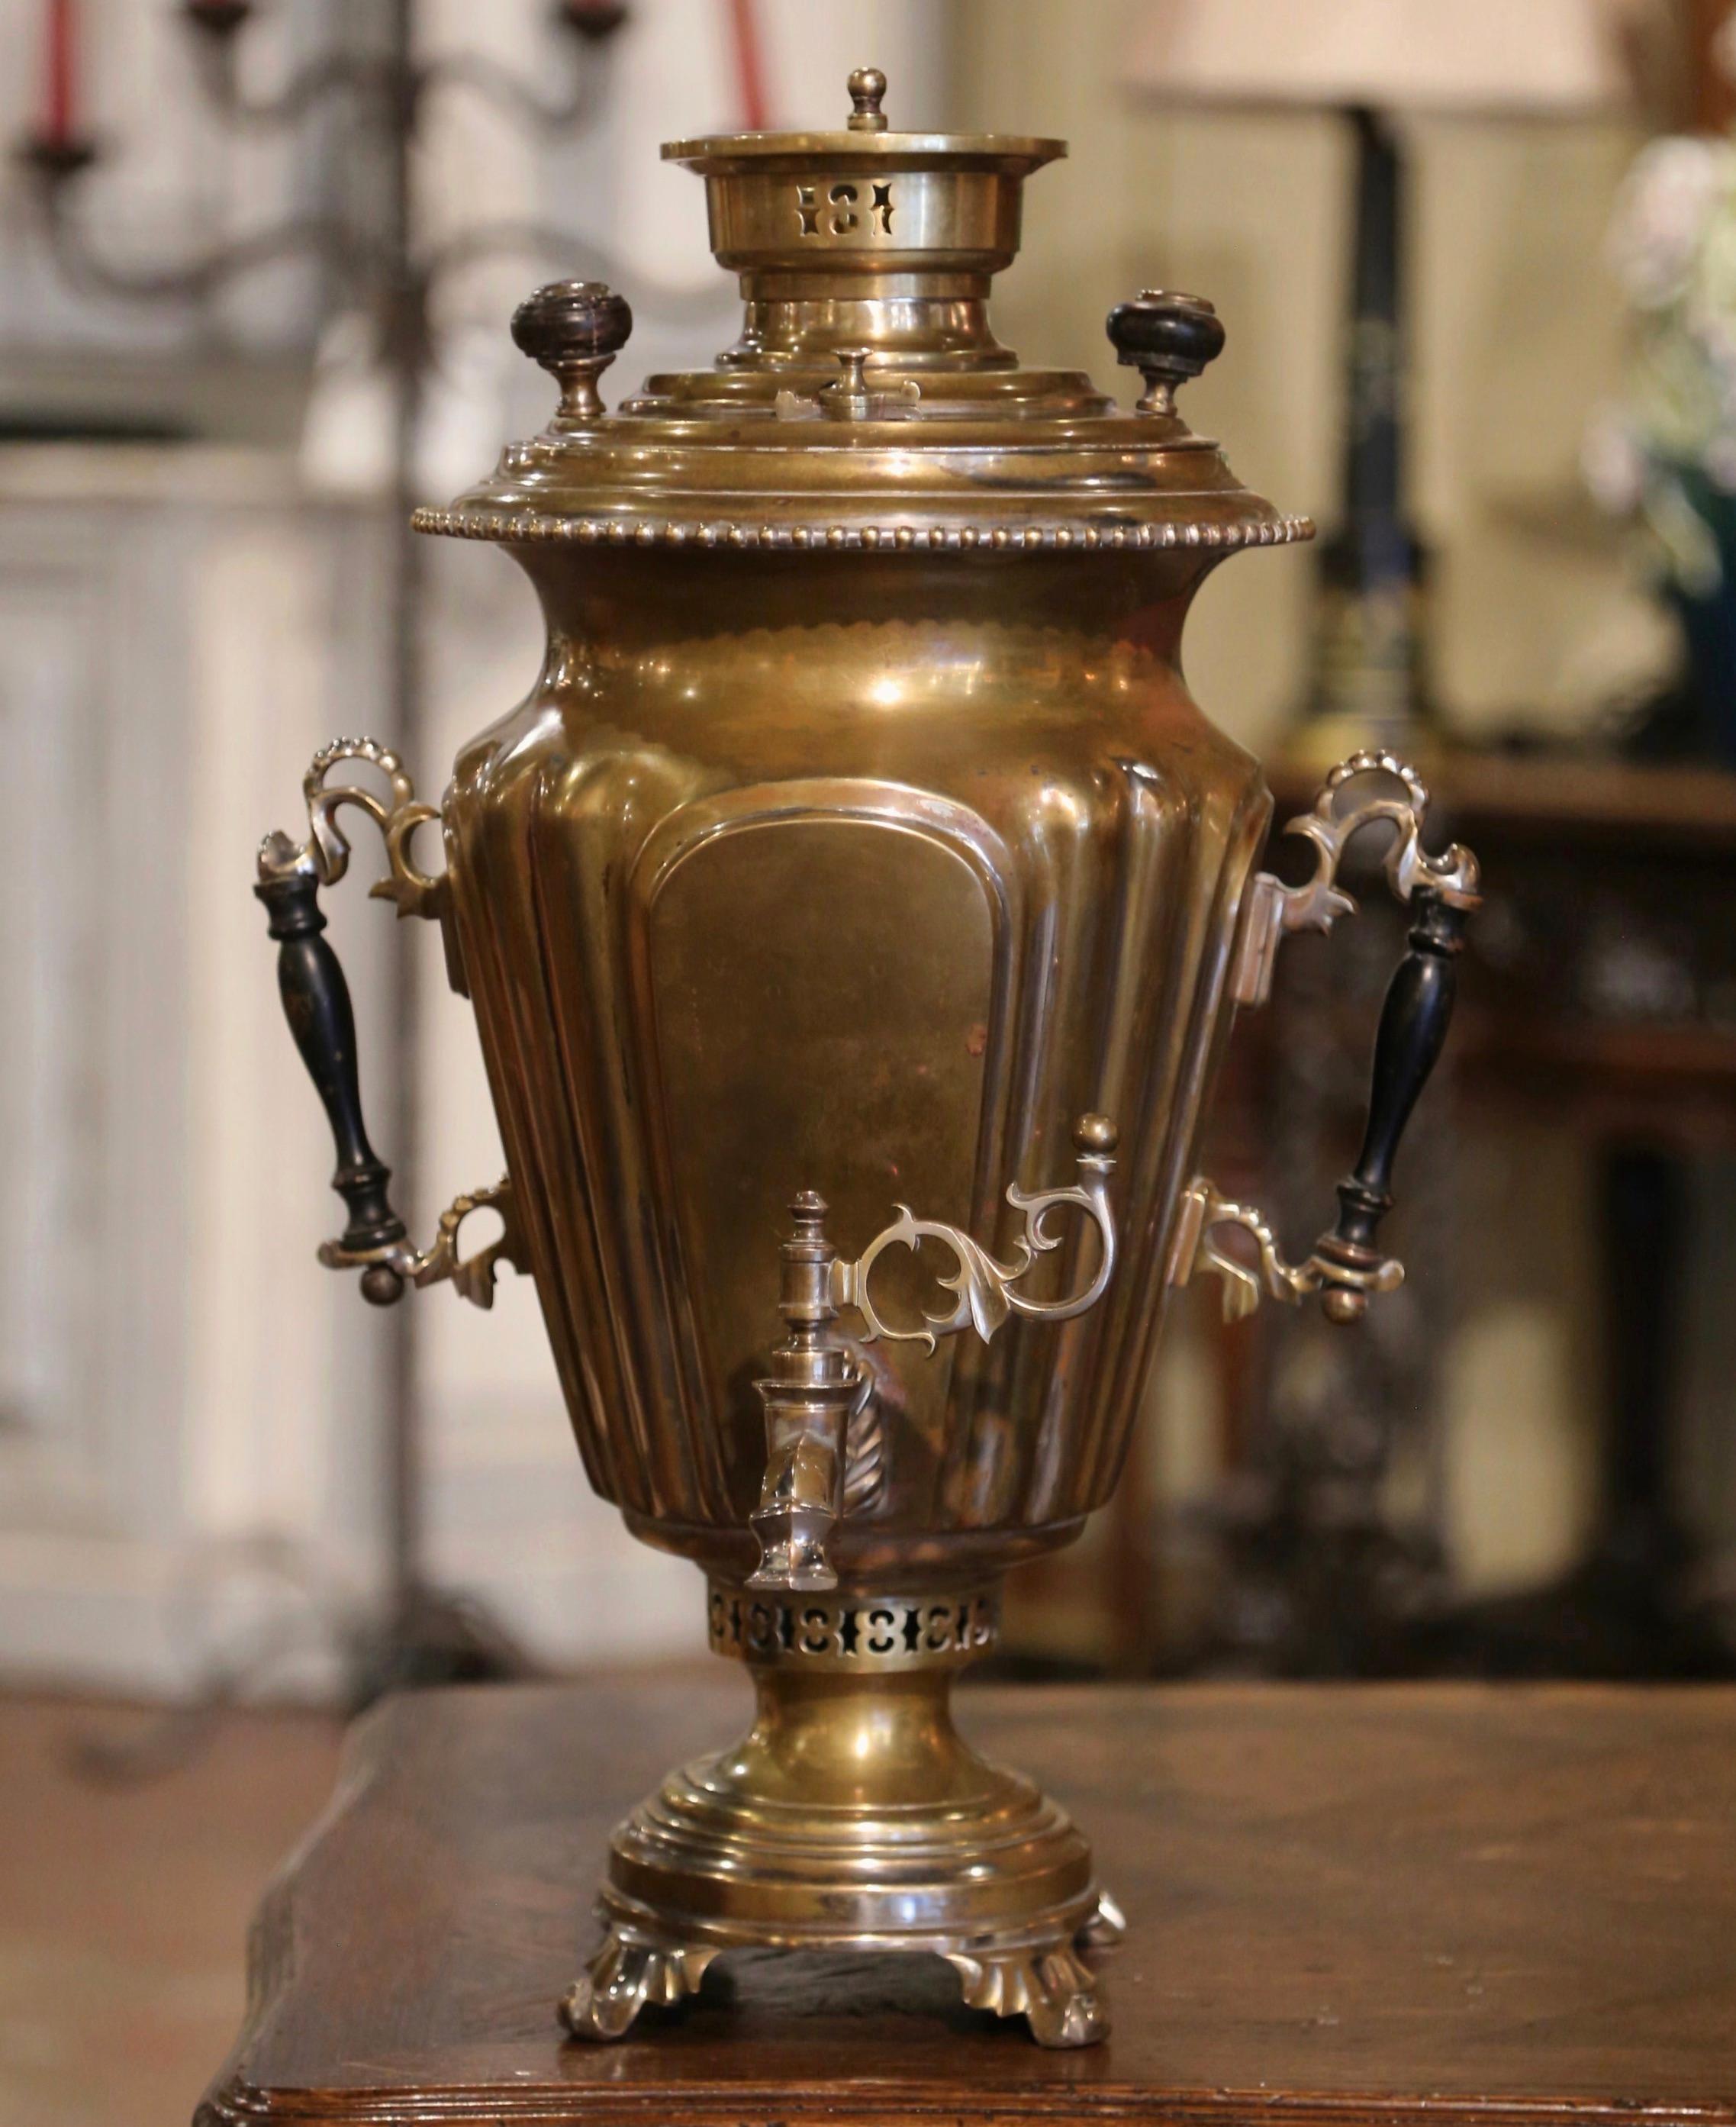 Decorate your bar, cellar or cabinet with this decorative samovar. Crafted in Russia circa 1898, the tea drinking device stands tall and features wooden handles and easy to use spout. The antique imperial style pitcher functions by putting hot coal